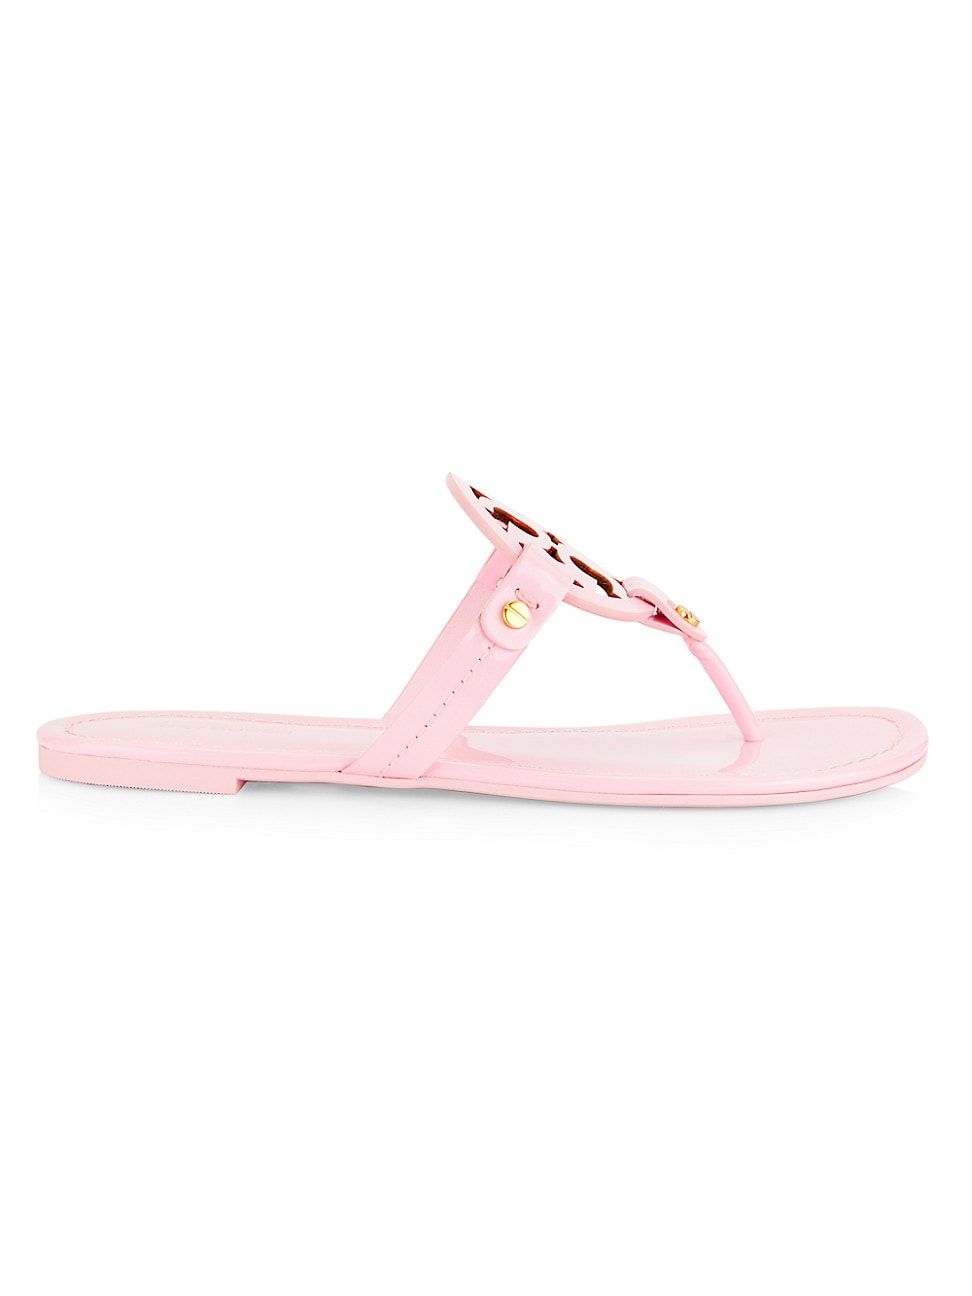 Women's Miller Classic Leather Sandals - Pink - Size 8.5 | Saks Fifth Avenue